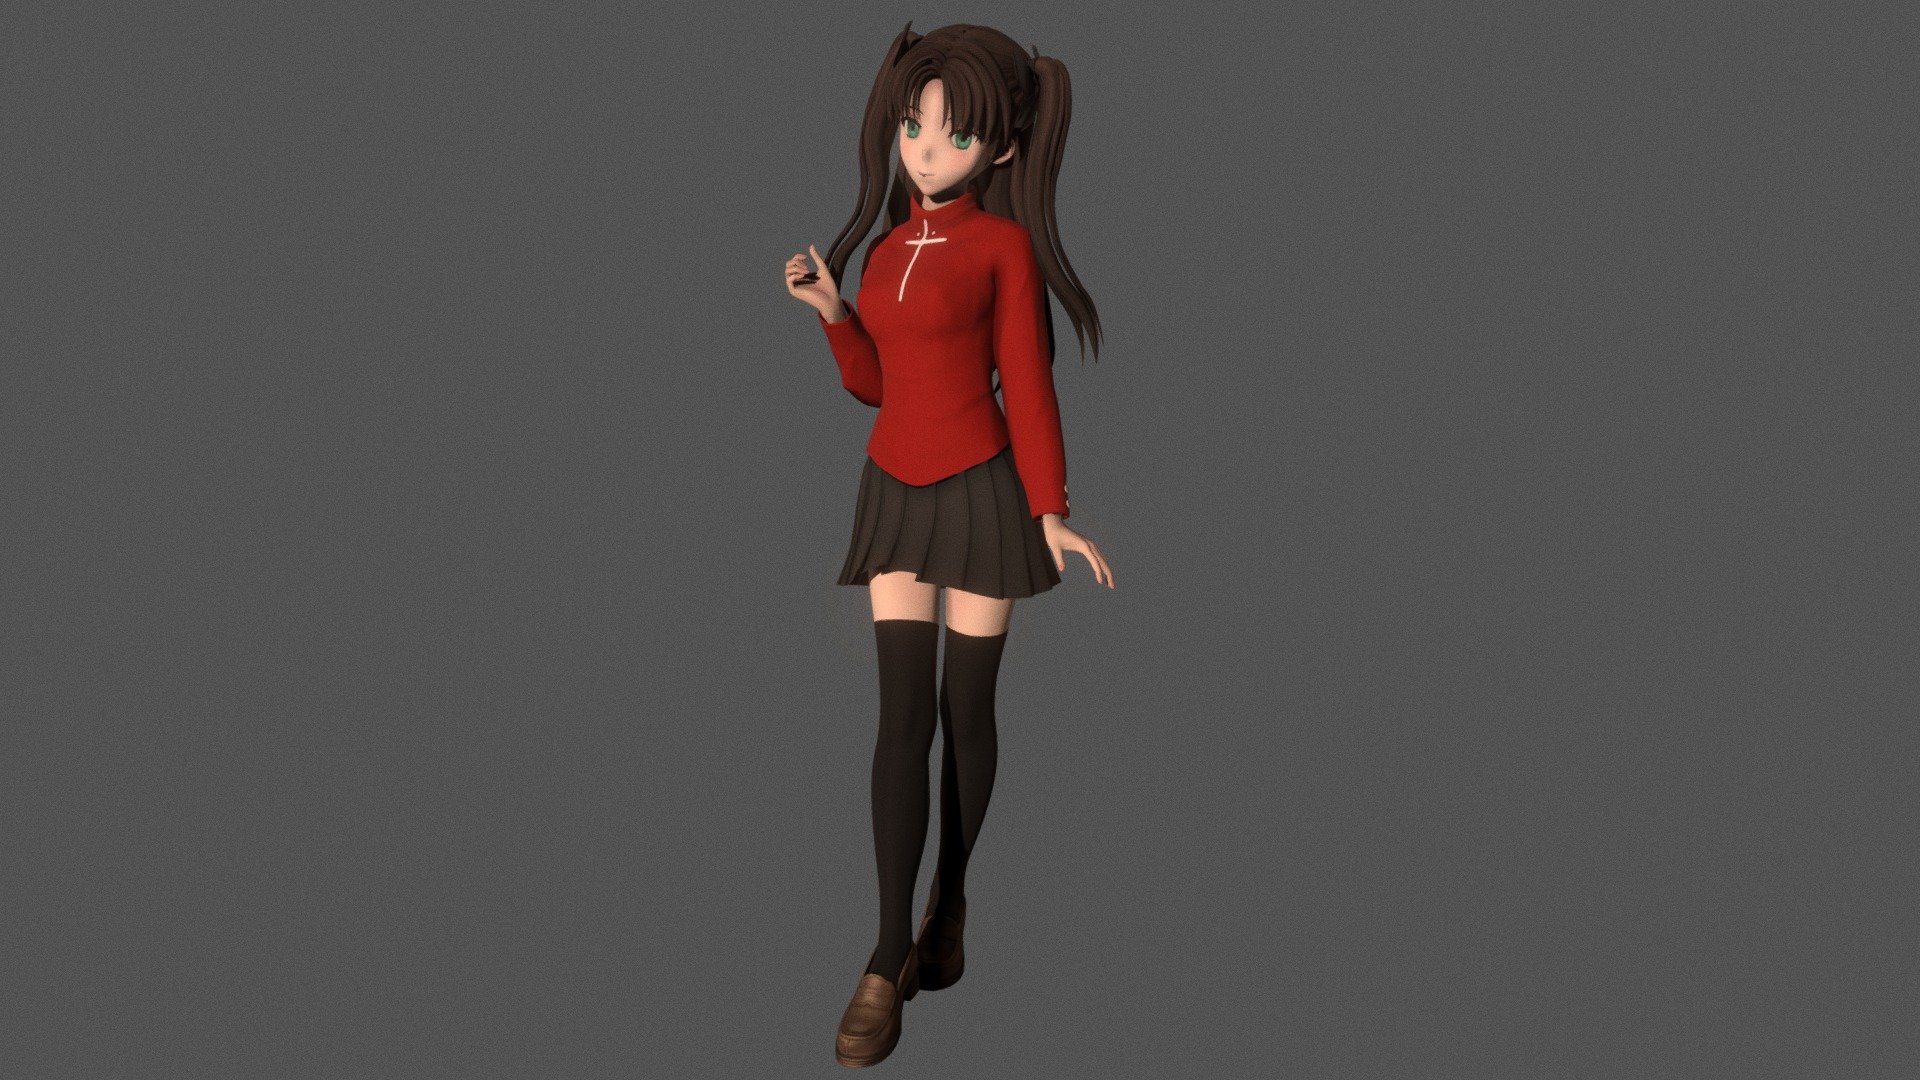 Posed model of anime girl Rin Tohsaka (Fate Stay Night).

This product include .FBX (ver. 7200) and .MAX (ver. 2010) files.

Rigged version: https://sketchfab.com/3d-models/t-pose-rigged-model-of-rin-tohsaka-d6d9e404df37443faab2fb44aa43cb93

I support convert this 3D model to various file formats: 3DS; AI; ASE; DAE; DWF; DWG; DXF; FLT; HTR; IGS; M3G; MQO; OBJ; SAT; STL; W3D; WRL; X.

You can buy all of my models in one pack to save cost: https://sketchfab.com/3d-models/all-of-my-anime-girls-c5a56156994e4193b9e8fa21a3b8360b

And I can make commission models.

If you have any questions, please leave a comment or contact me via my email 3d.eden.project@gmail.com 3d model